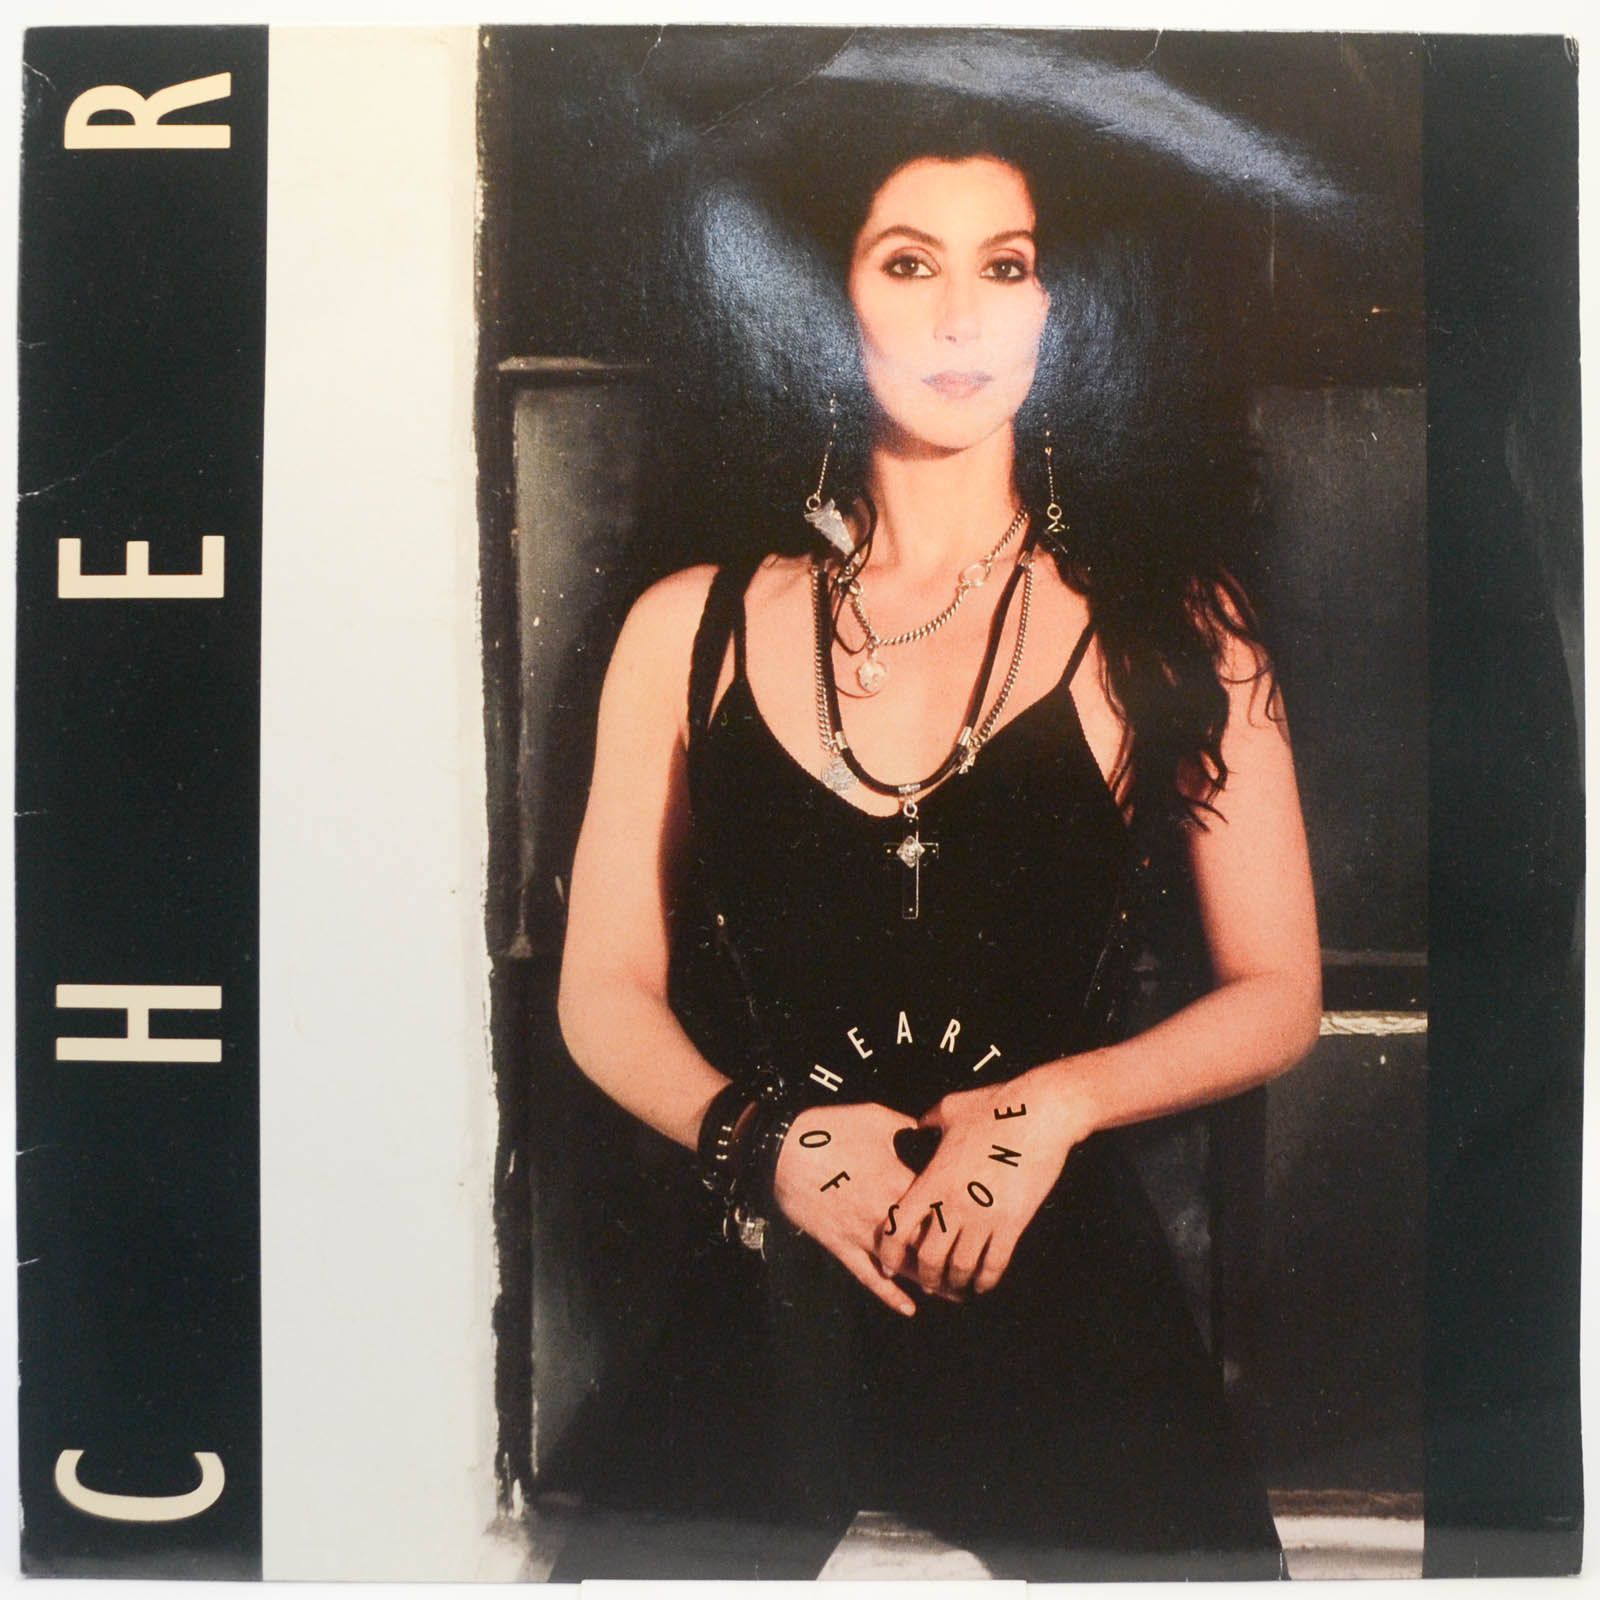 Cher — Heart Of Stone, 1989